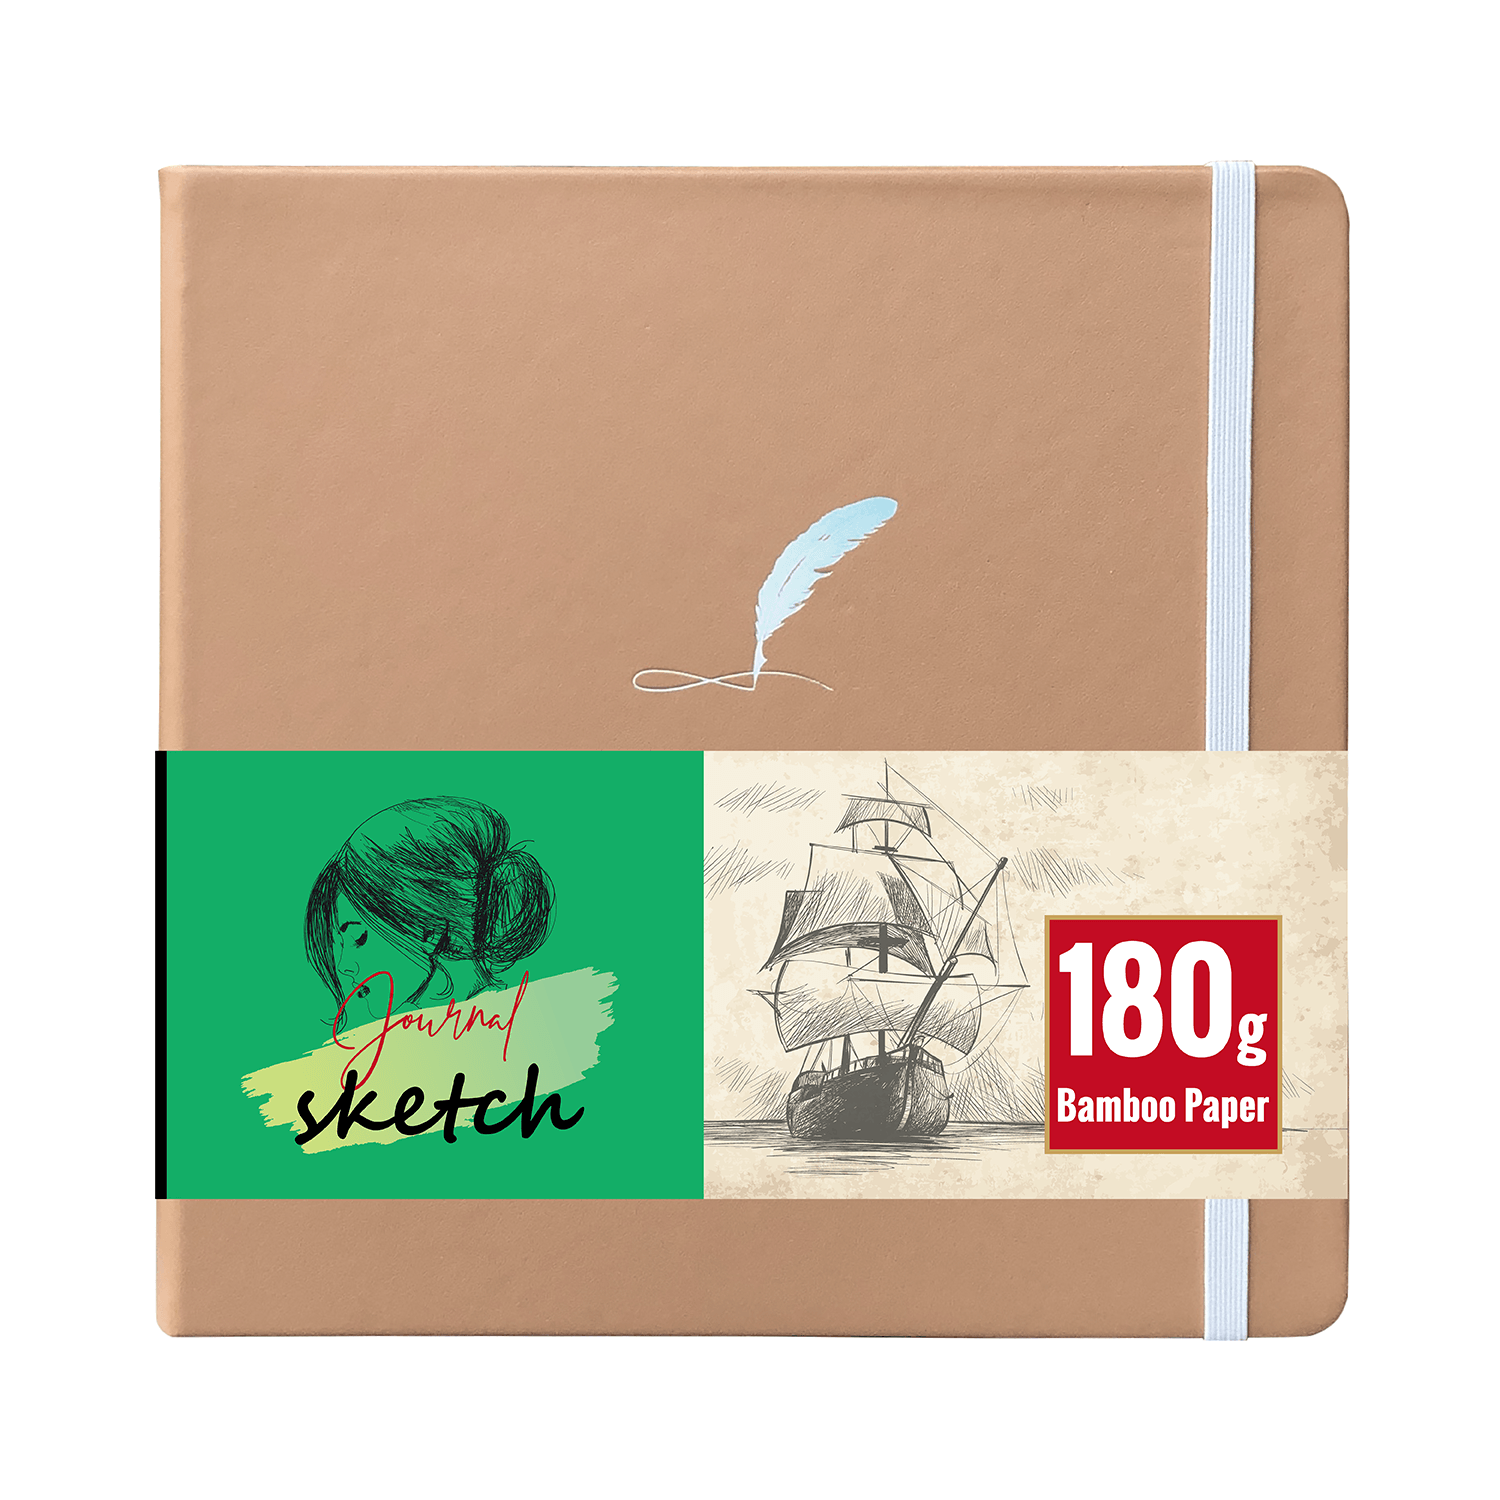 Sketchbook Review: BUKE A5 Size Hardcover Sketchbook Journal - 180Gsm Ultra  Bamboo Paper - The Well-Appointed Desk